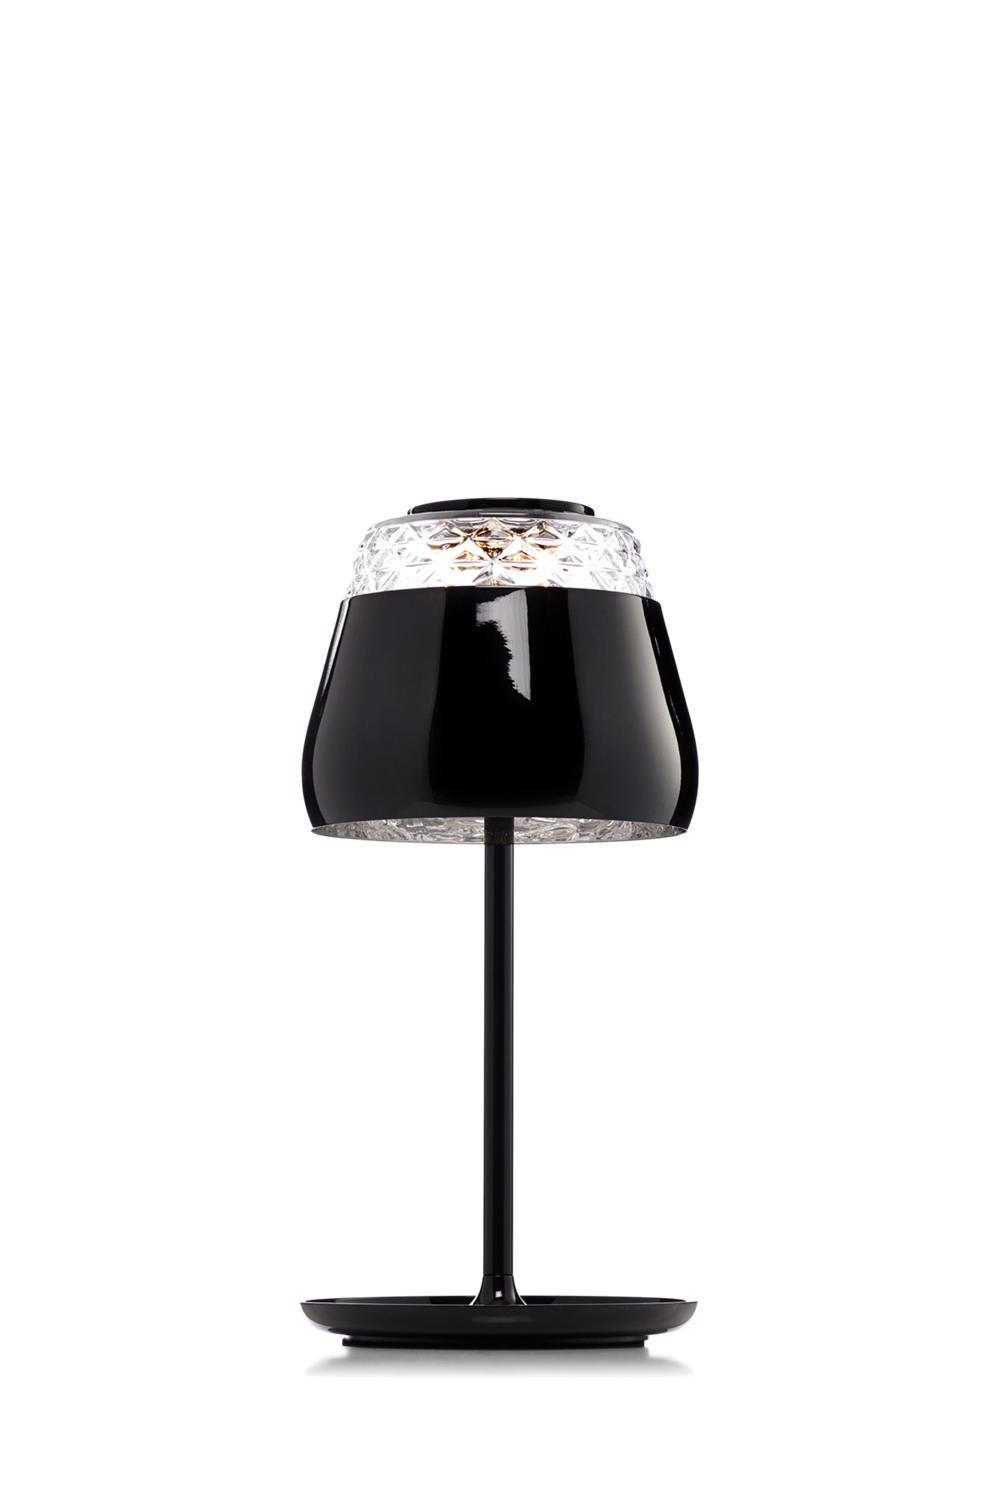 Nordic Modern Design Luxury Bed Side Table Lamp